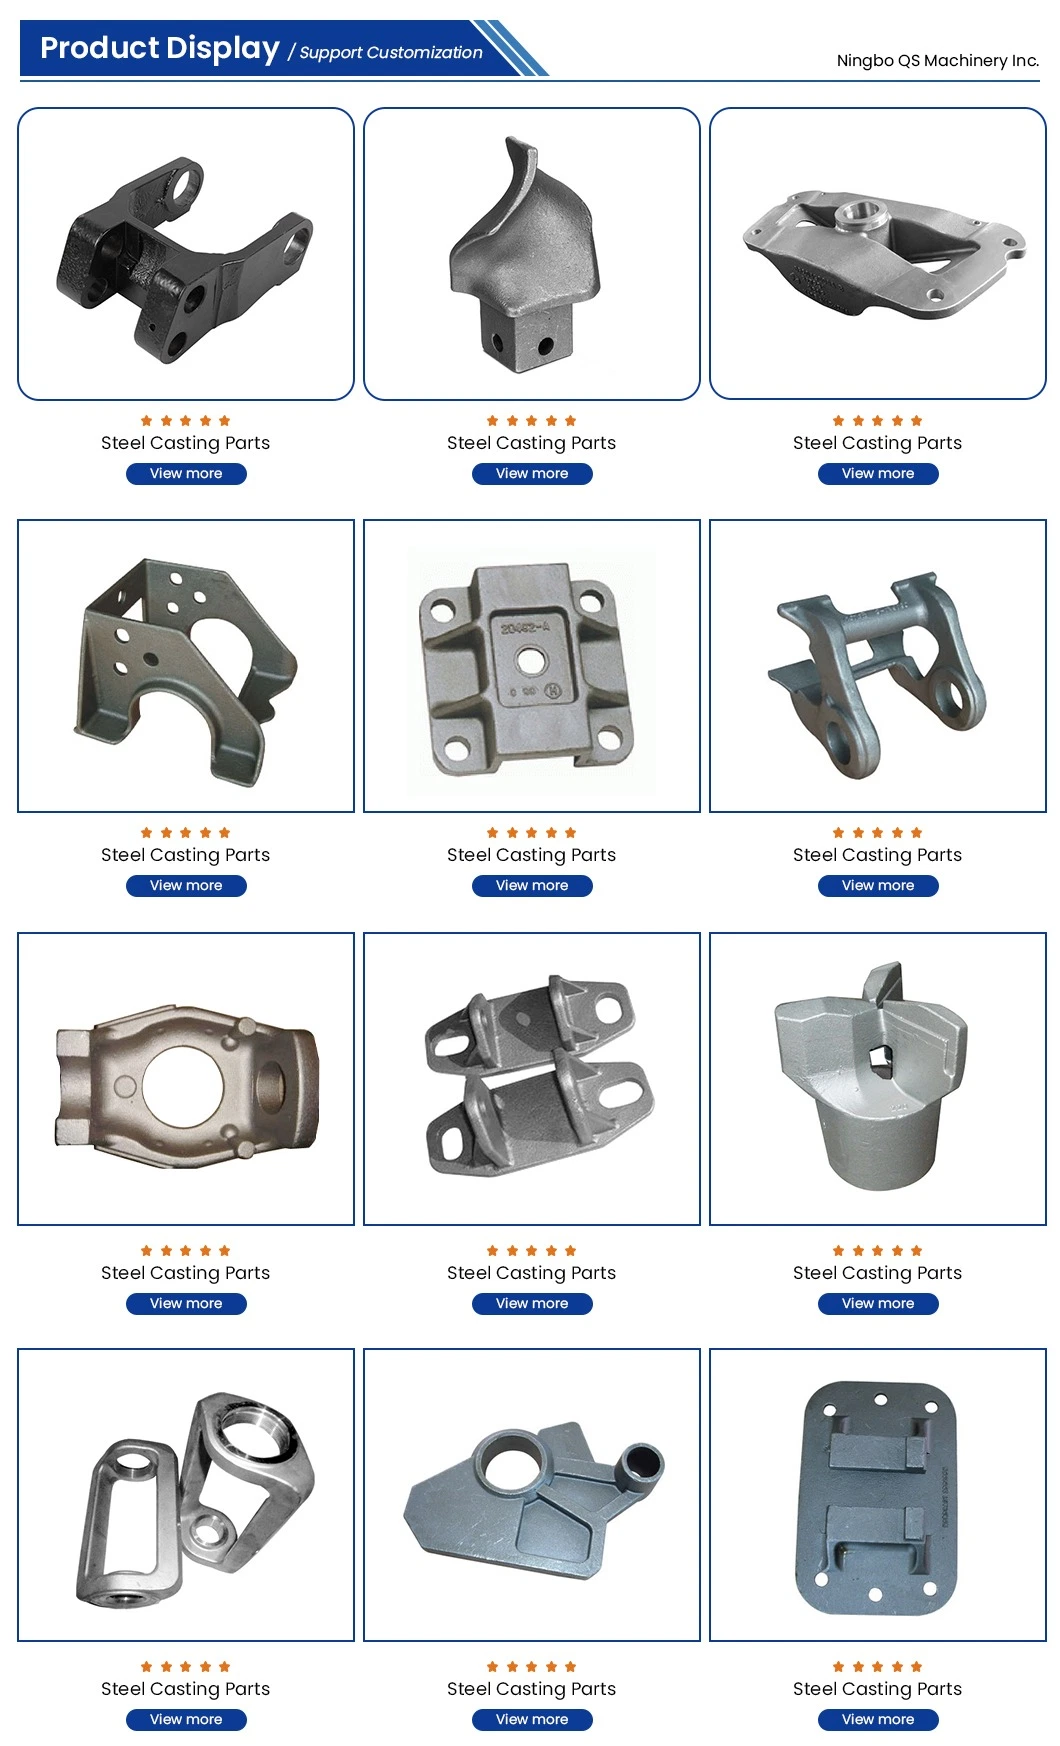 QS Machinery Aluminium Die Casting Factory Customized Moulding Process Processing Services China Cast Steel Structural Parts for Agricultural Machinery